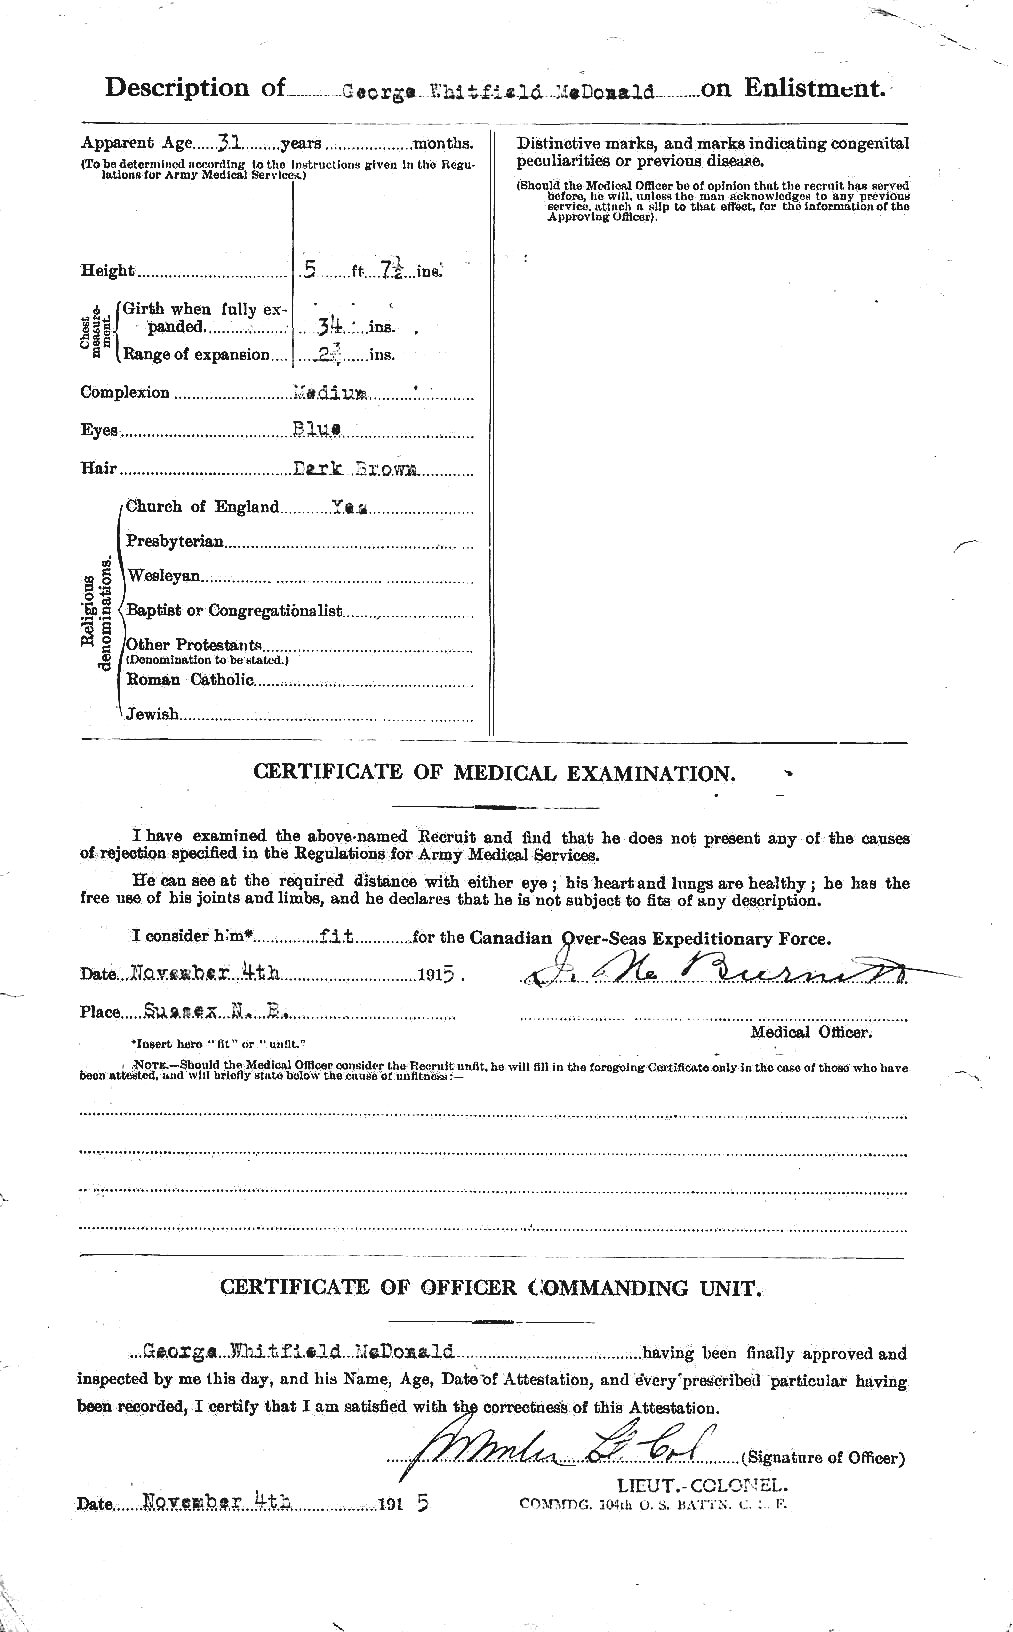 Personnel Records of the First World War - CEF 518866b